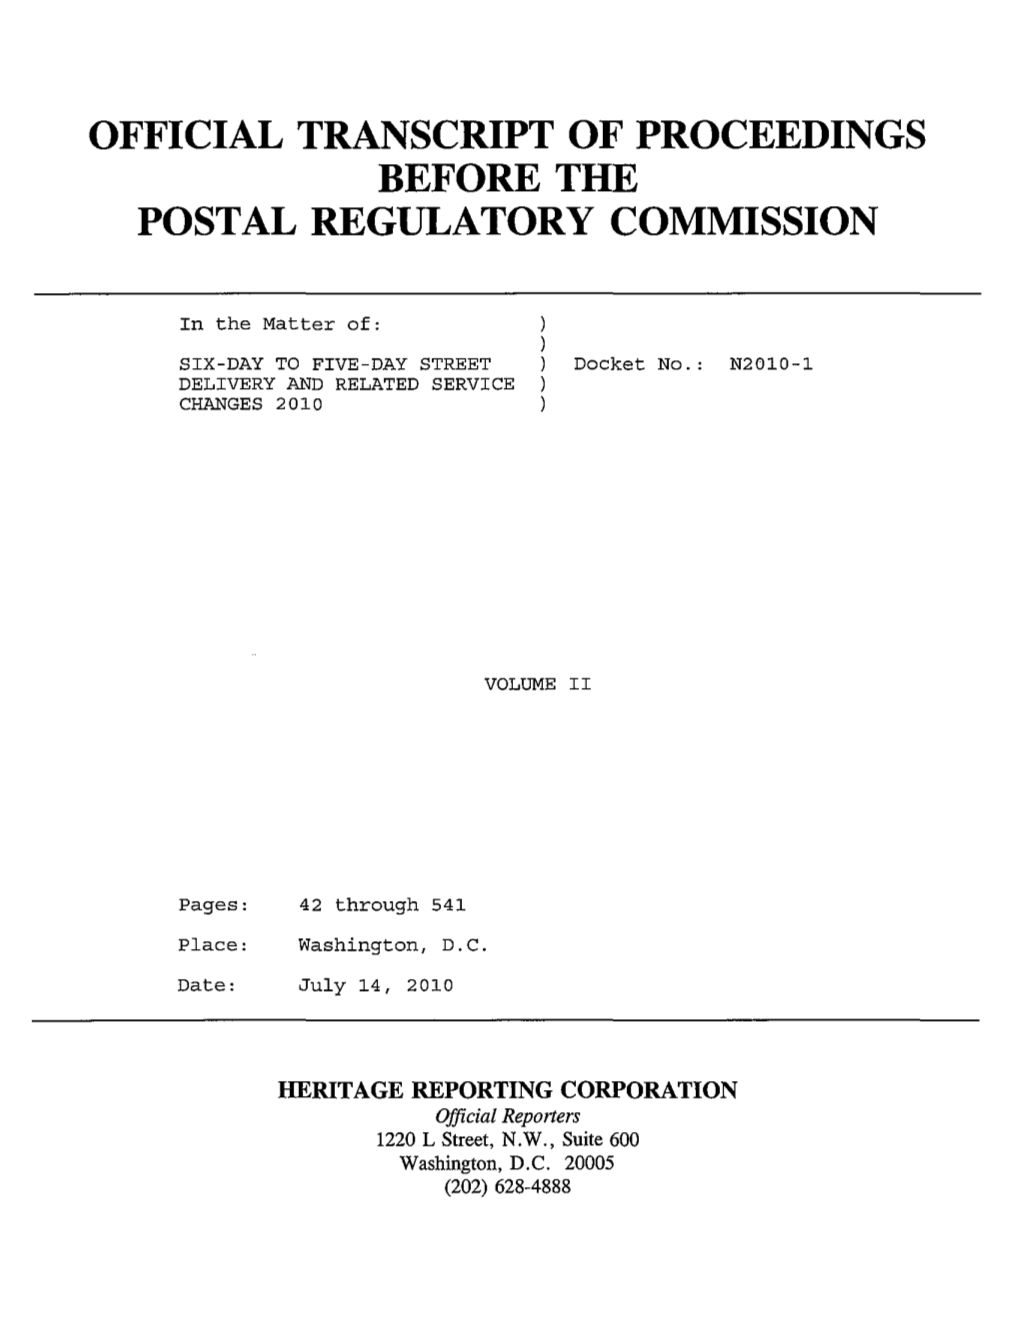 Official Transcript of Proceedings Before the Postal Regulatory Commission